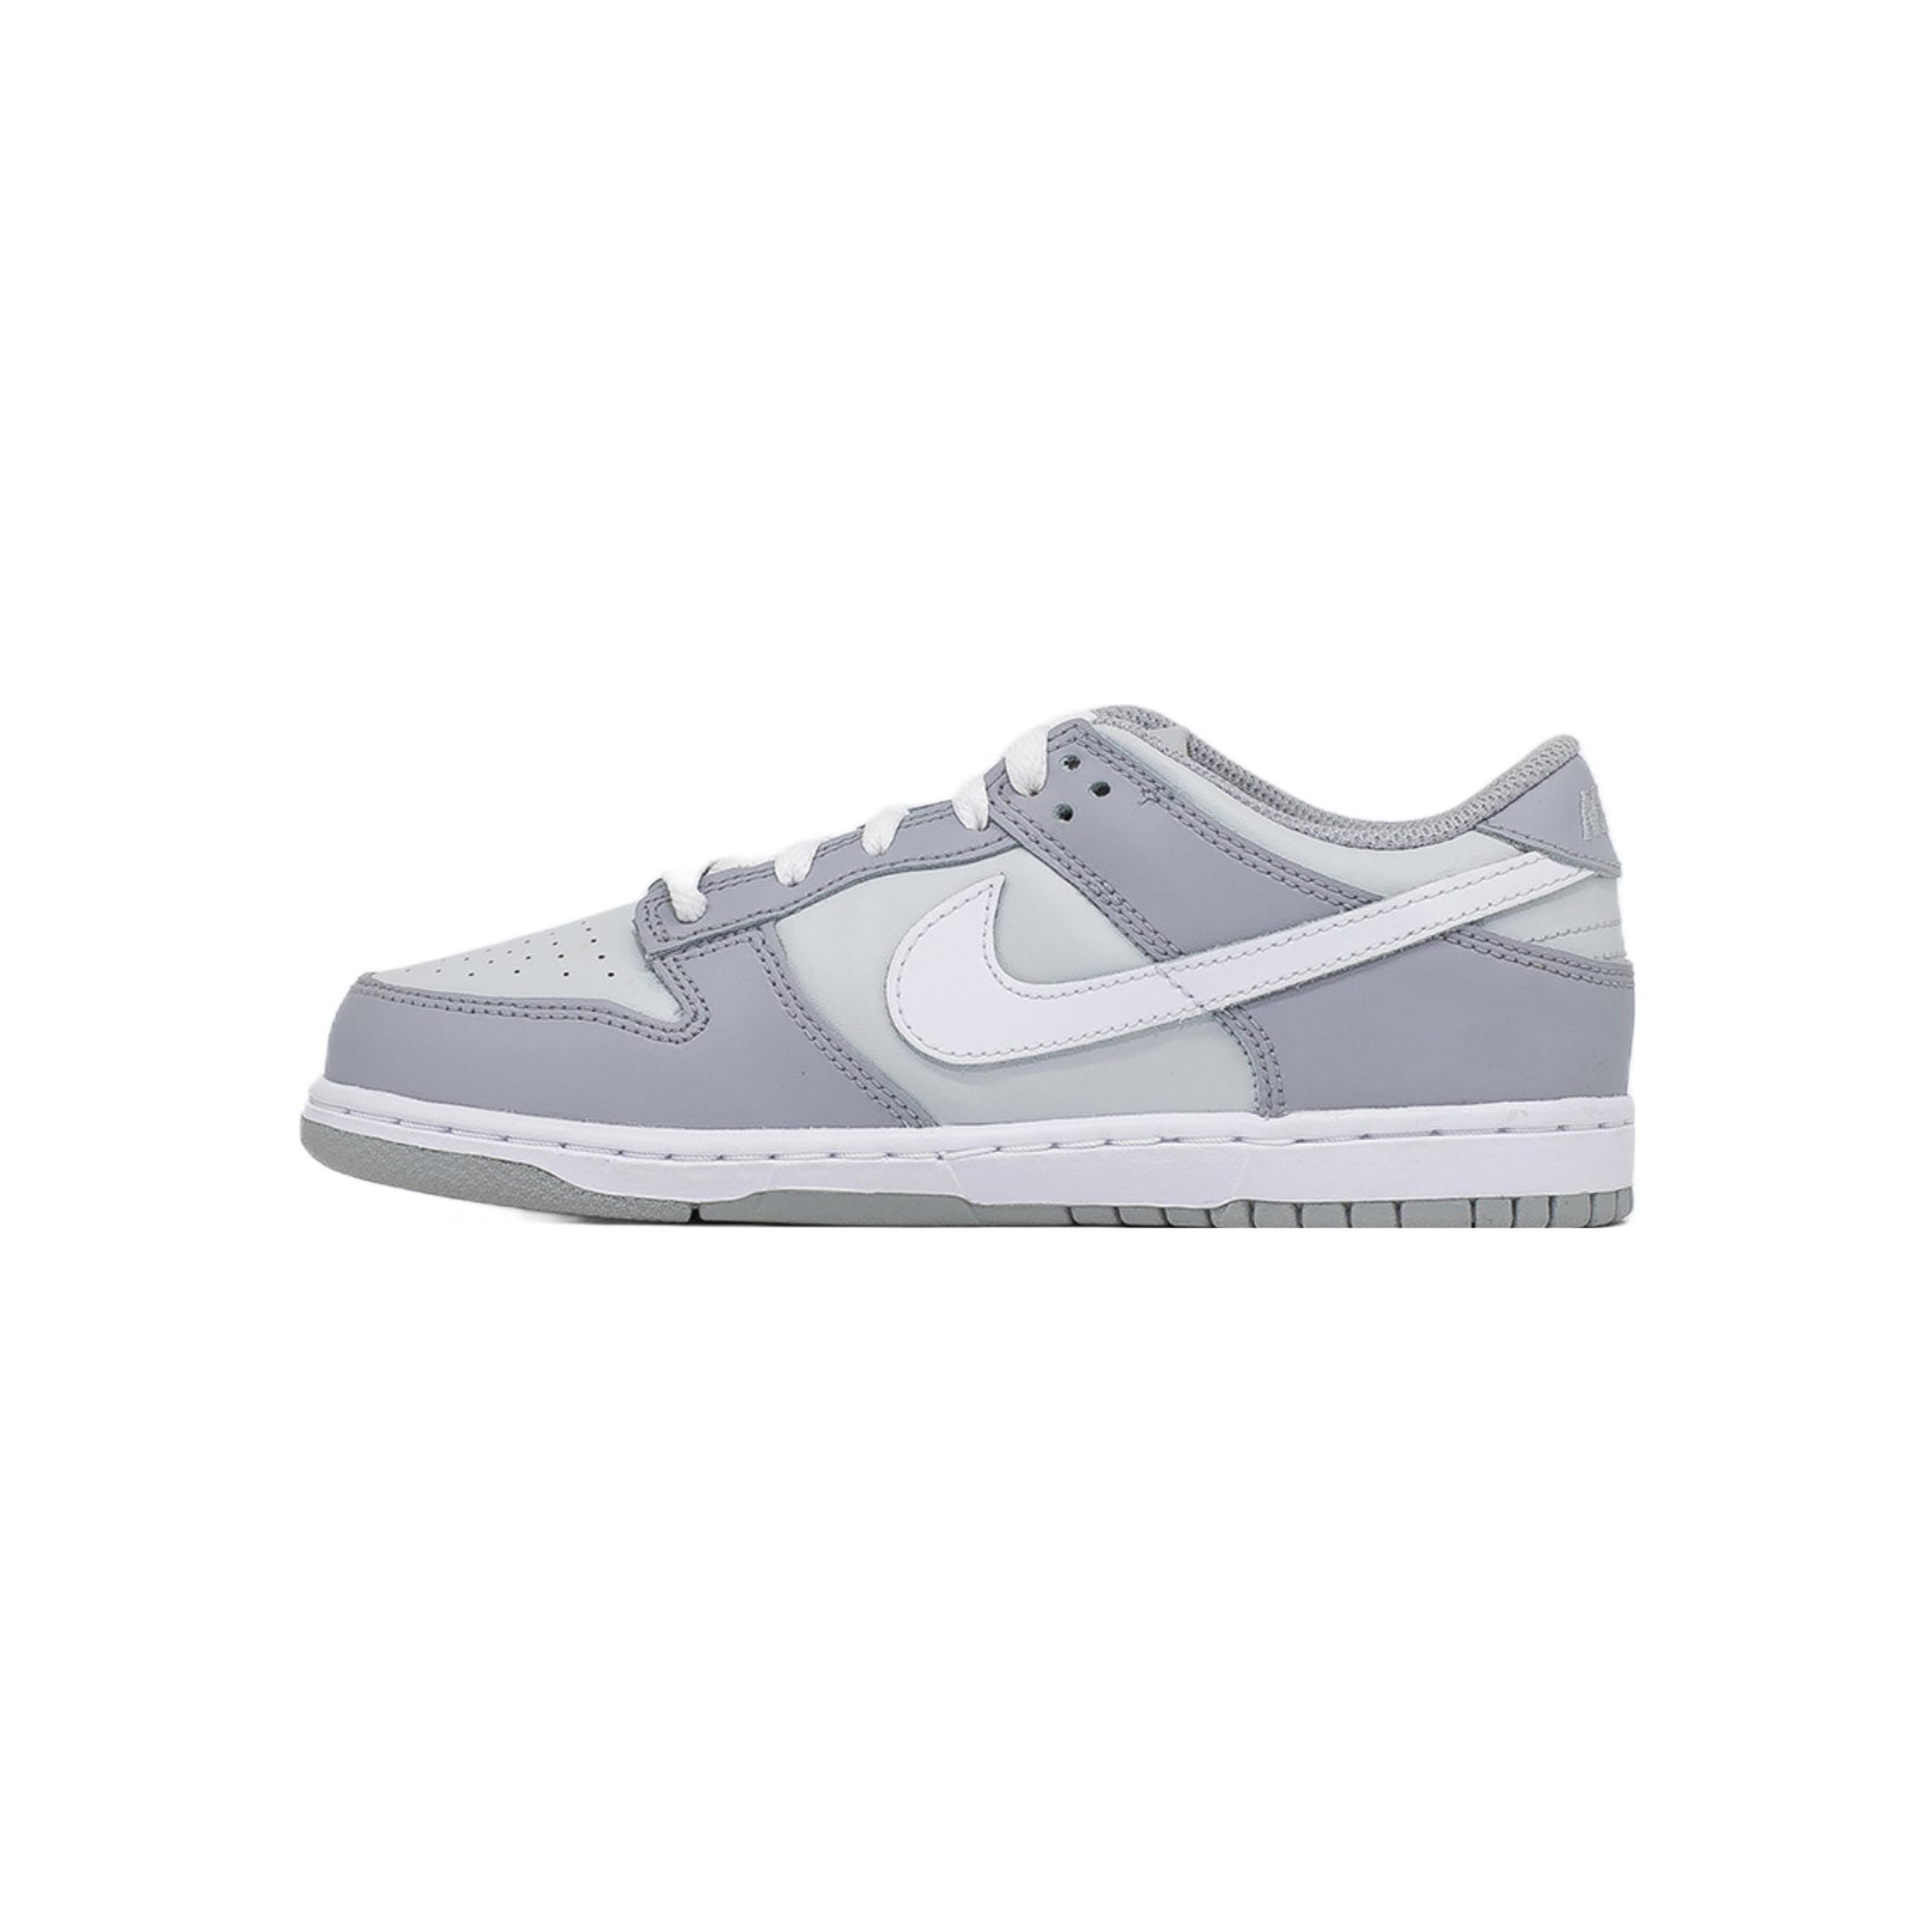 Alternate View 1 of Nike Dunk Low (PS), Wolf Grey